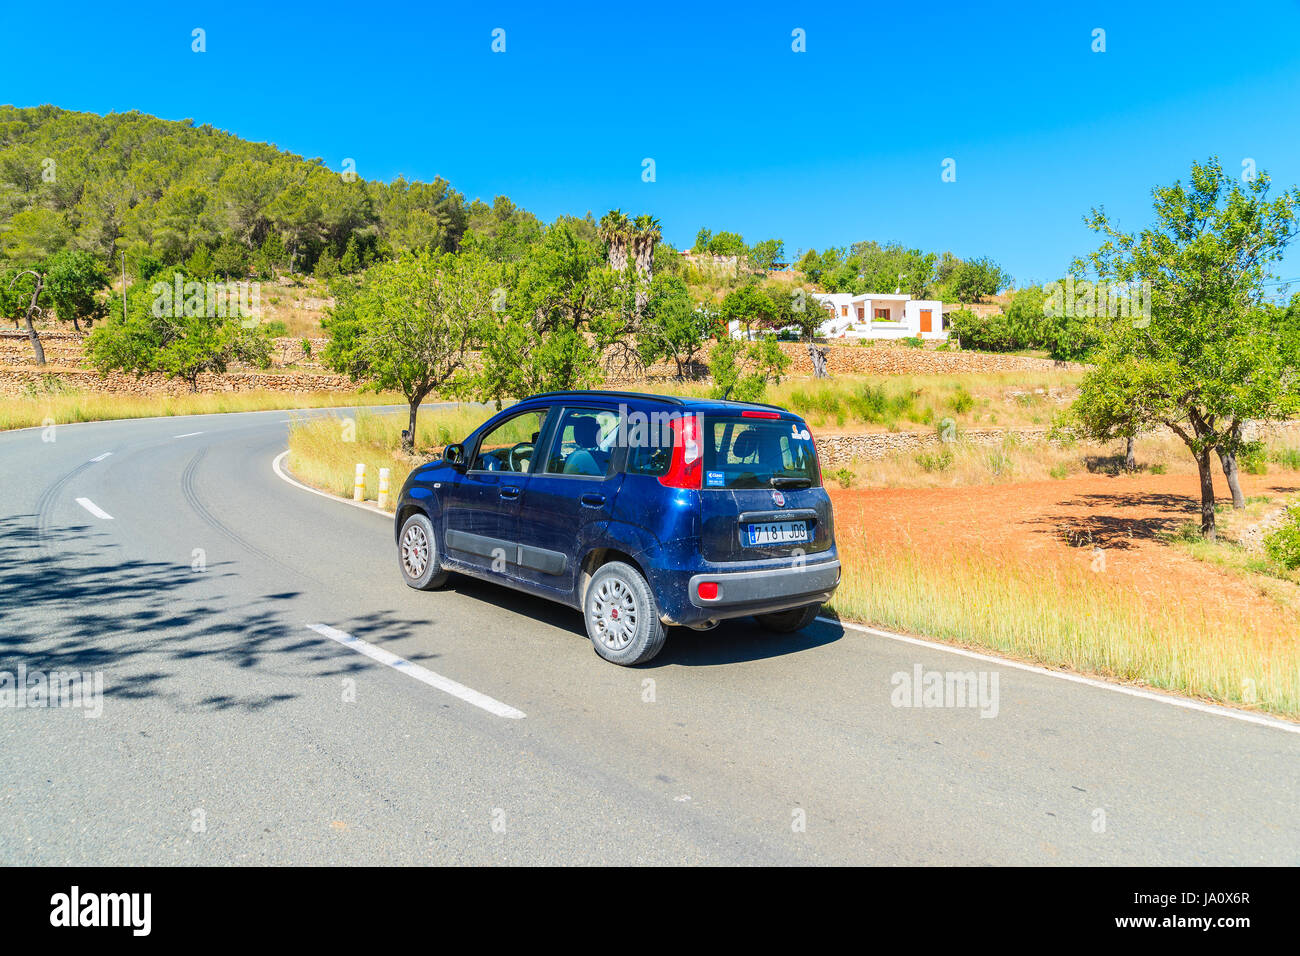 IBIZA ISLAND, SPAIN - MAY 19, 2017: hire car on scenic road along olive tree orchard in northern part of Ibiza island, Spain, Renting a car is best wa Stock Photo